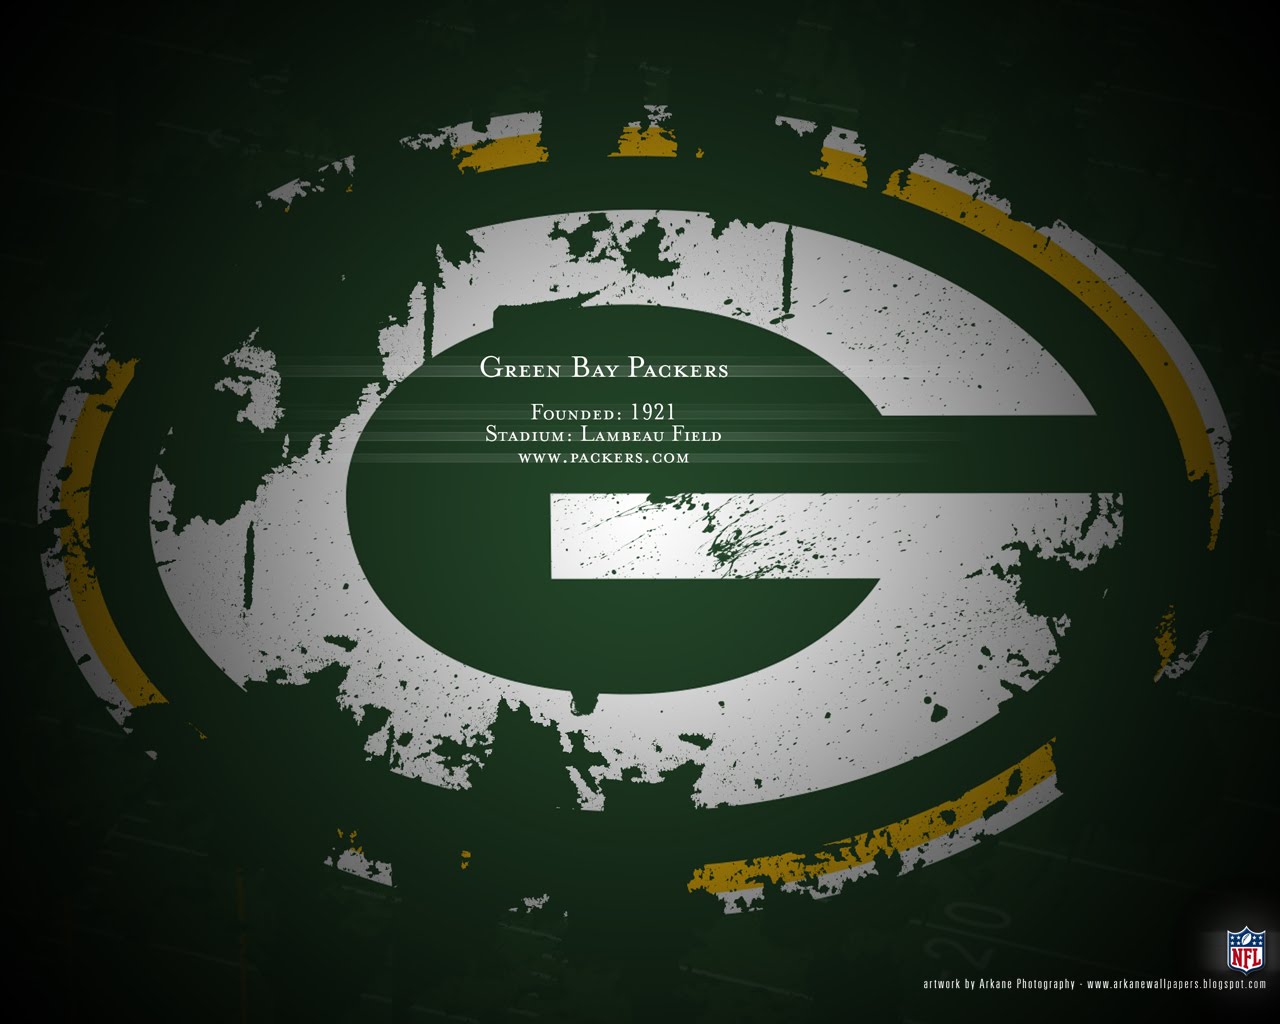 Green Bay Packers Live Wallpaper 1280x1024